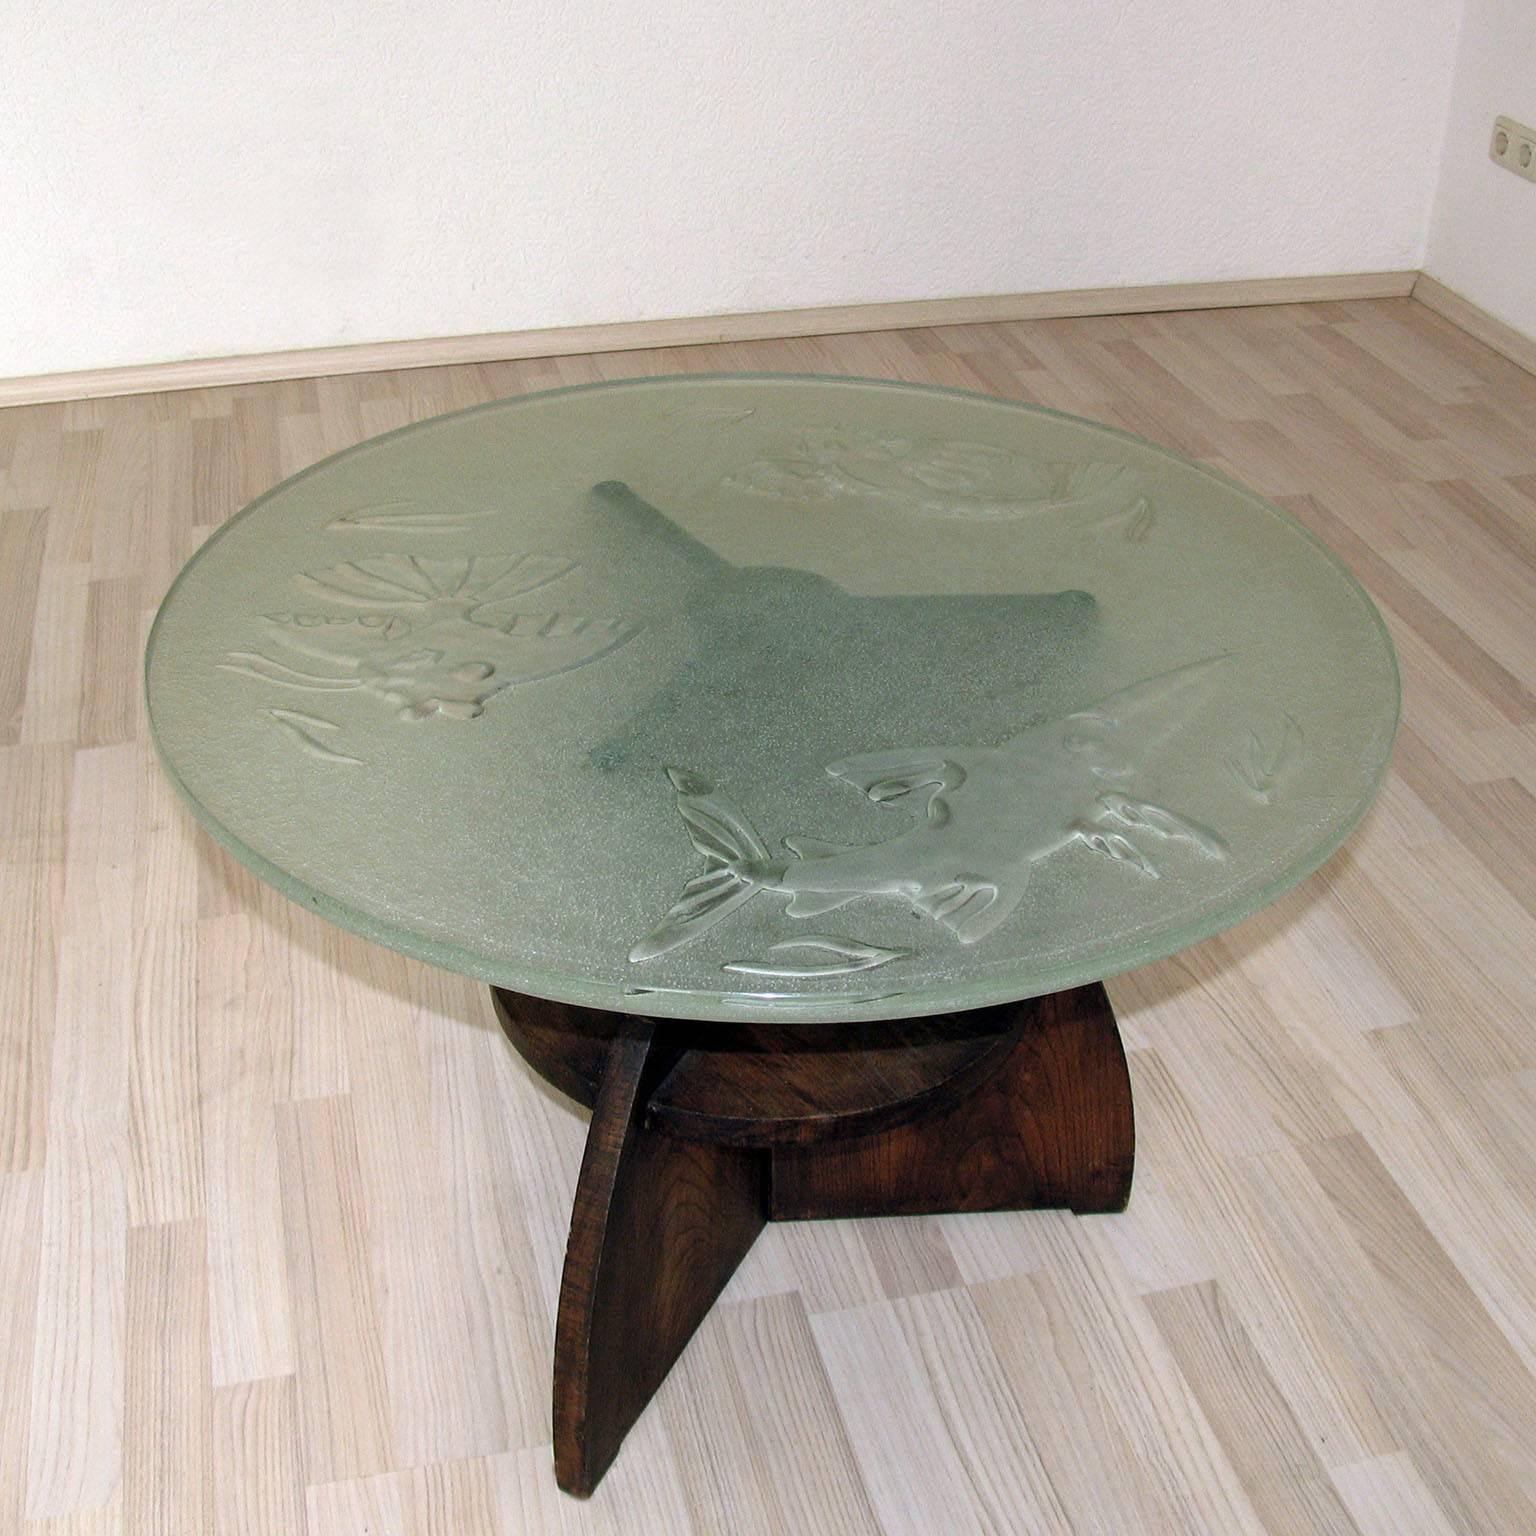 Etched Art Deco Coffee Table with Glass Top, by Glössner and Orrefors, Sweden, 1940s